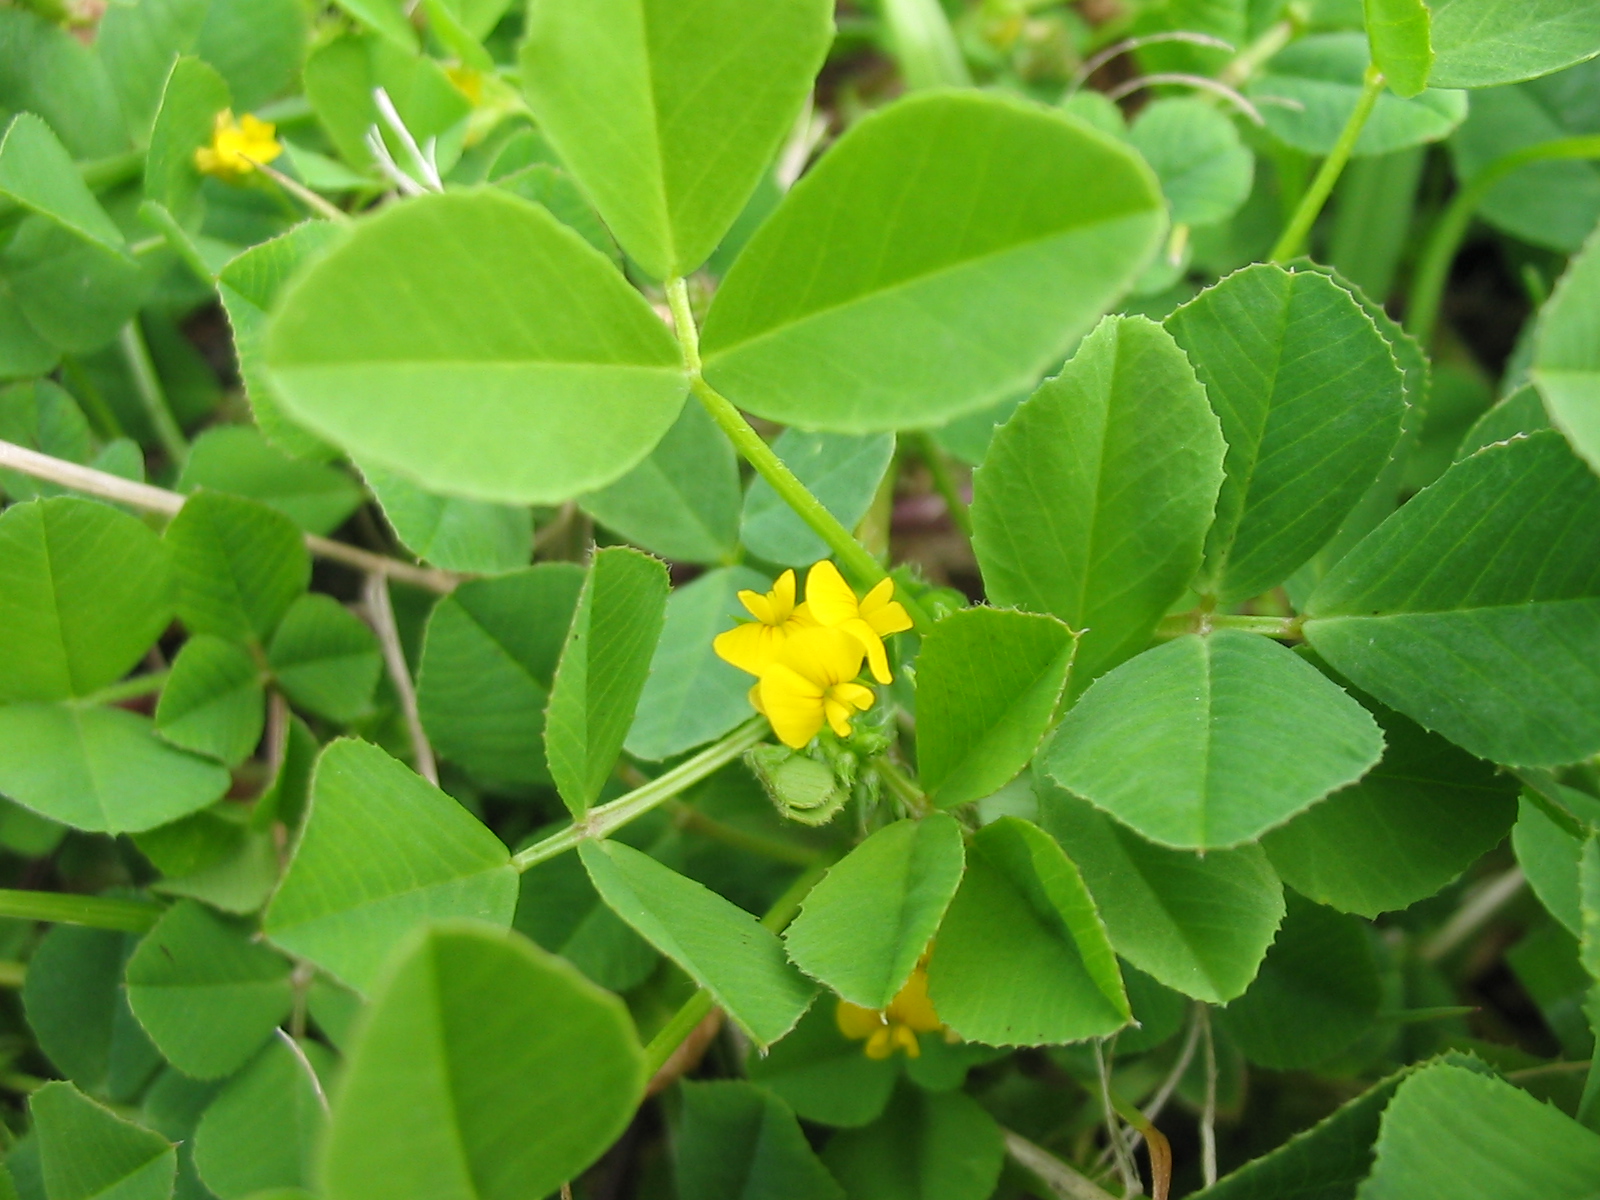 Trifoliate leaves and yellow flowers